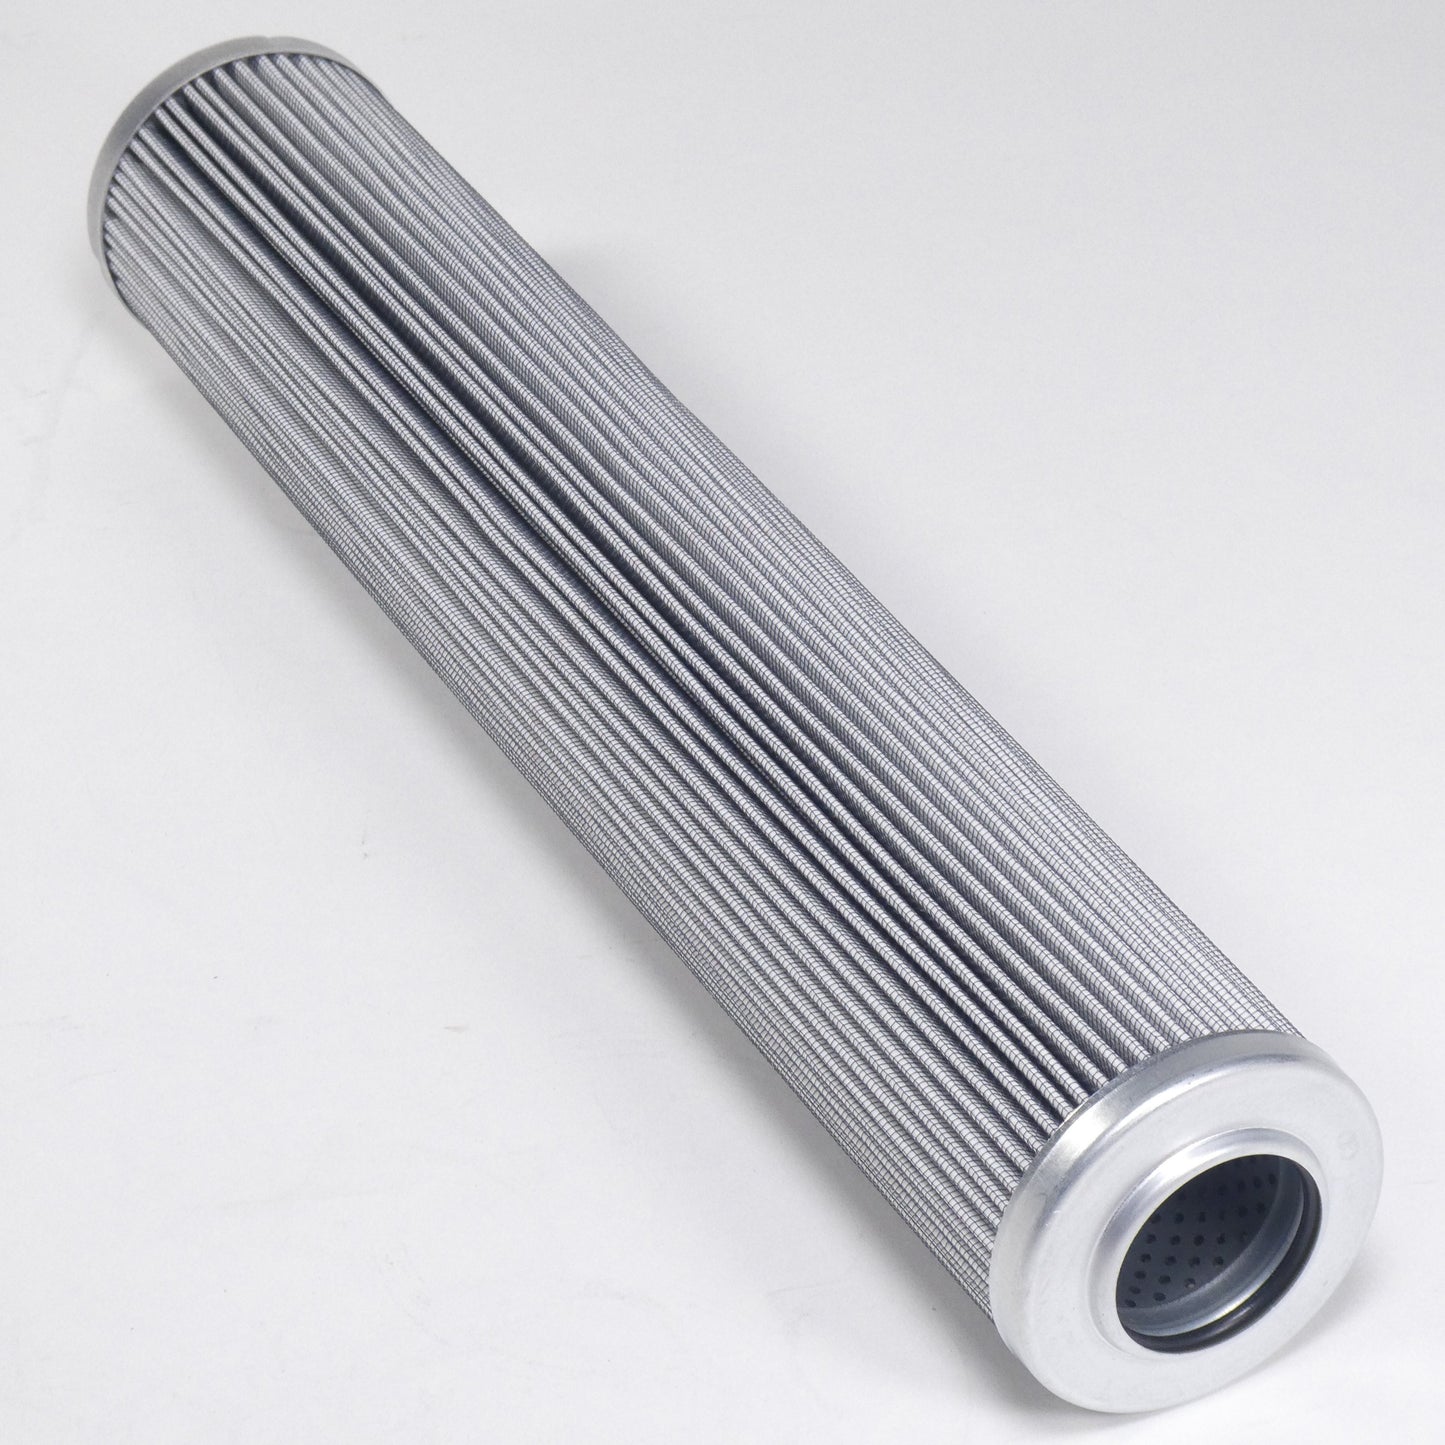 Hydrafil Replacement Filter Element for Pall AC9600FUT16J